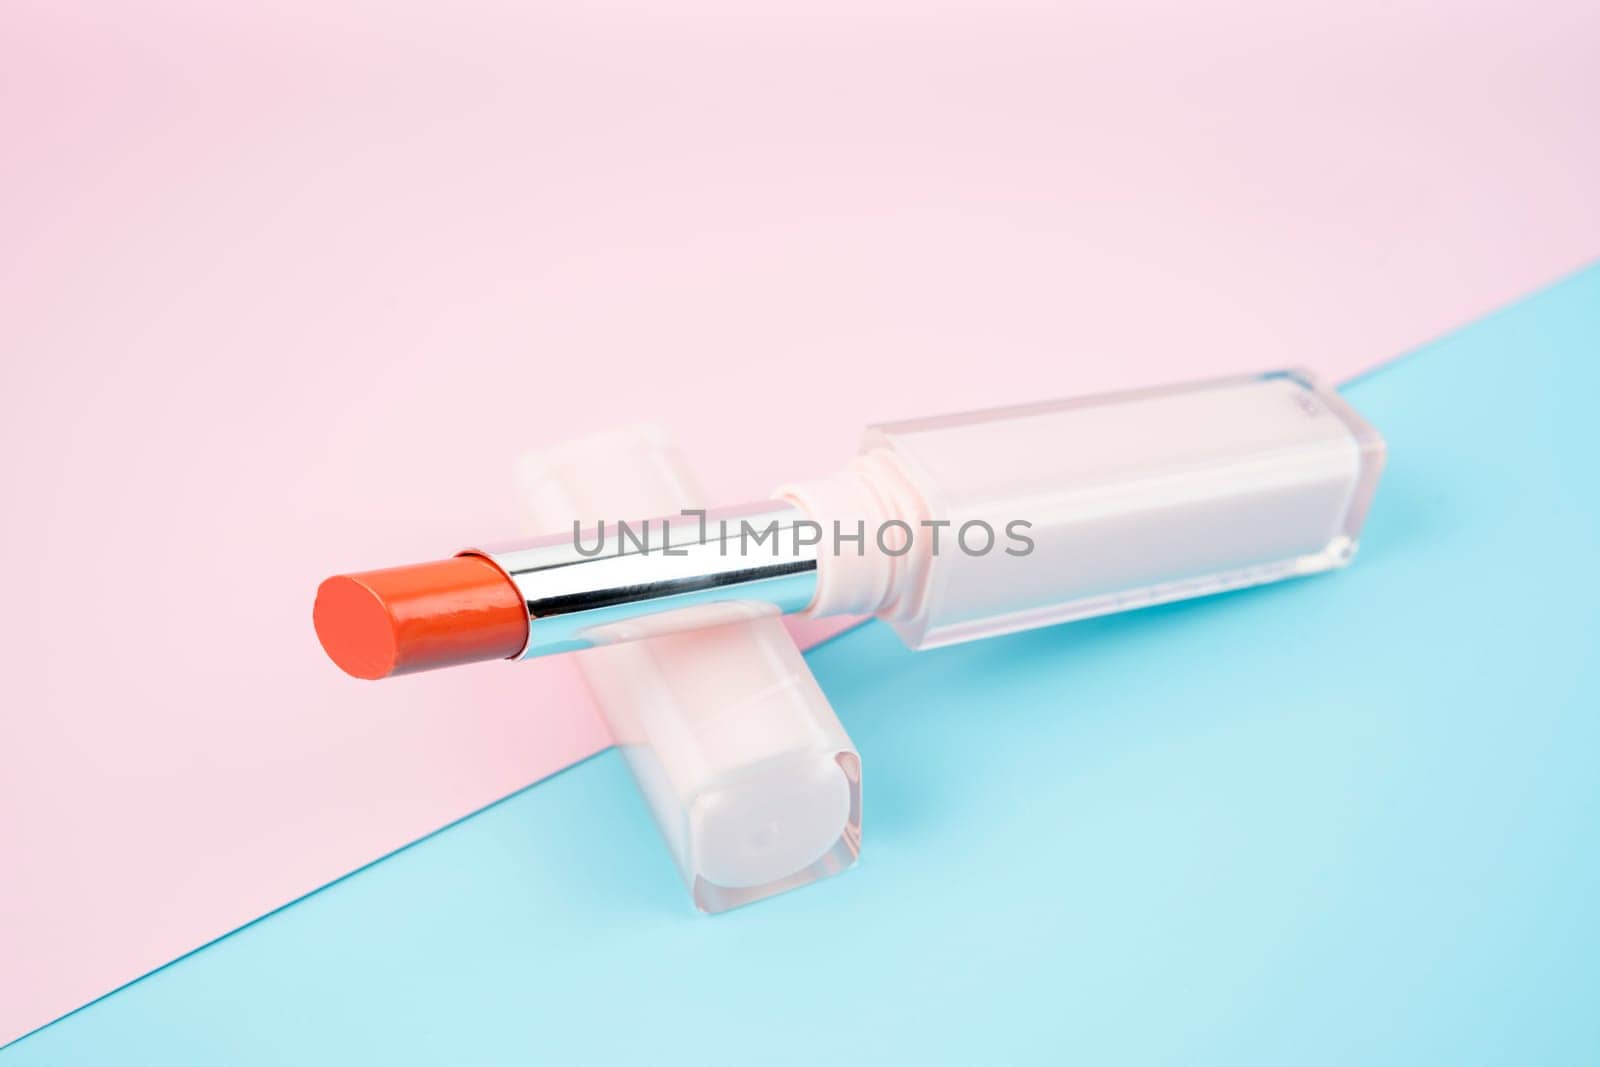 The Bright lipstick on colorful background. Professional makeup product. by Gamjai